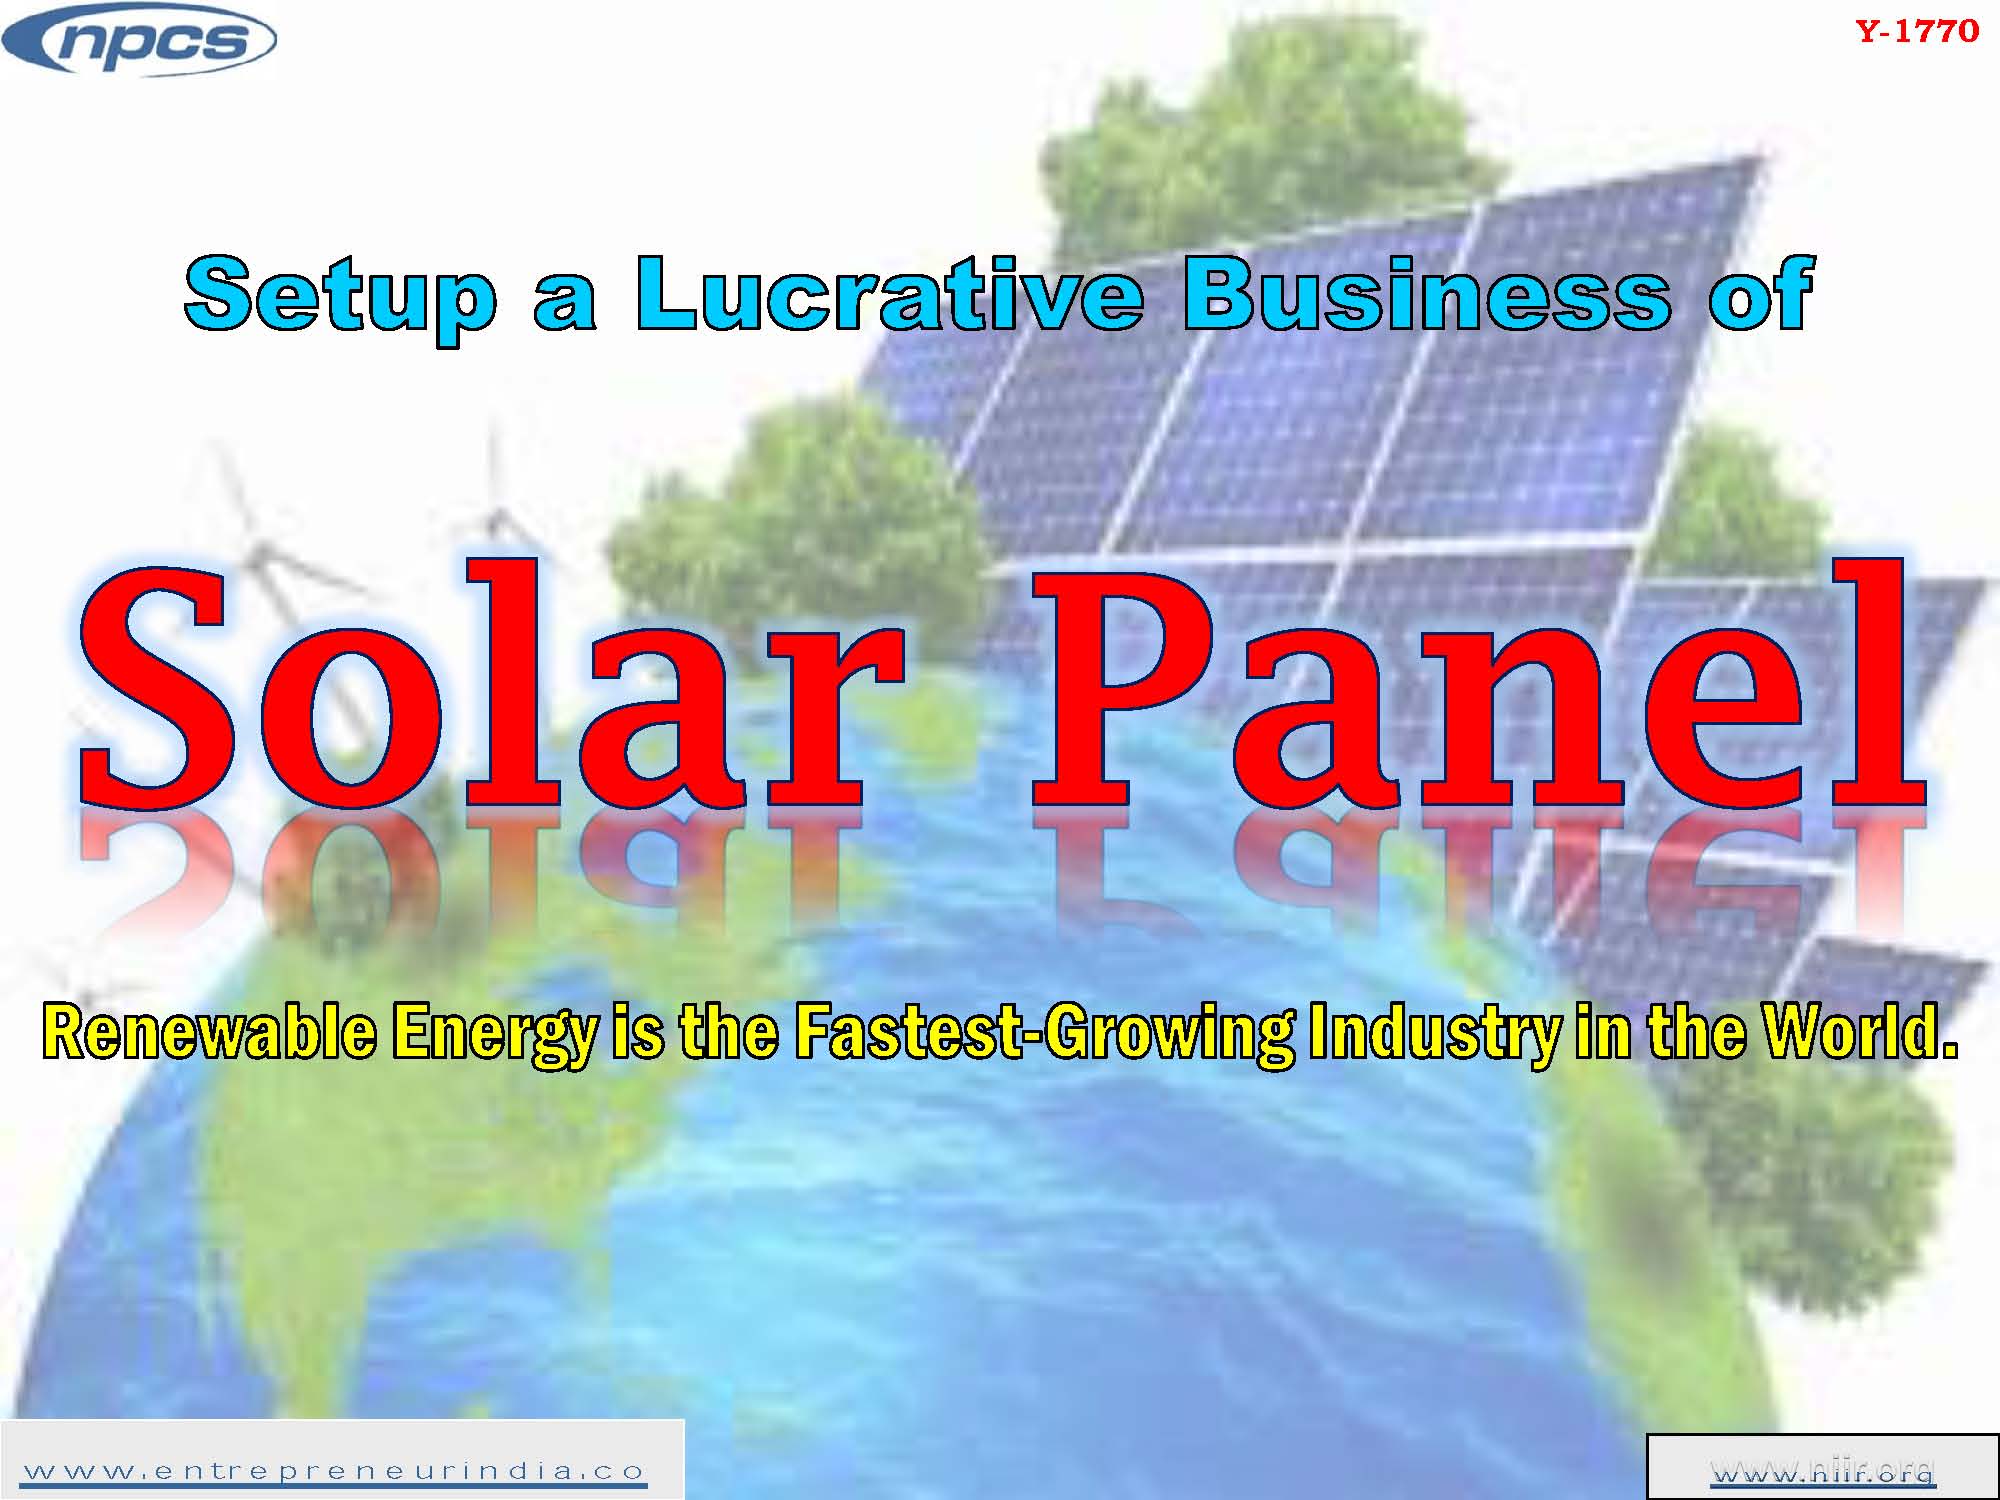 Setup a Lucrative Business of Solar Panel Renewable Energy is the Fastest-Growing Industry in the World